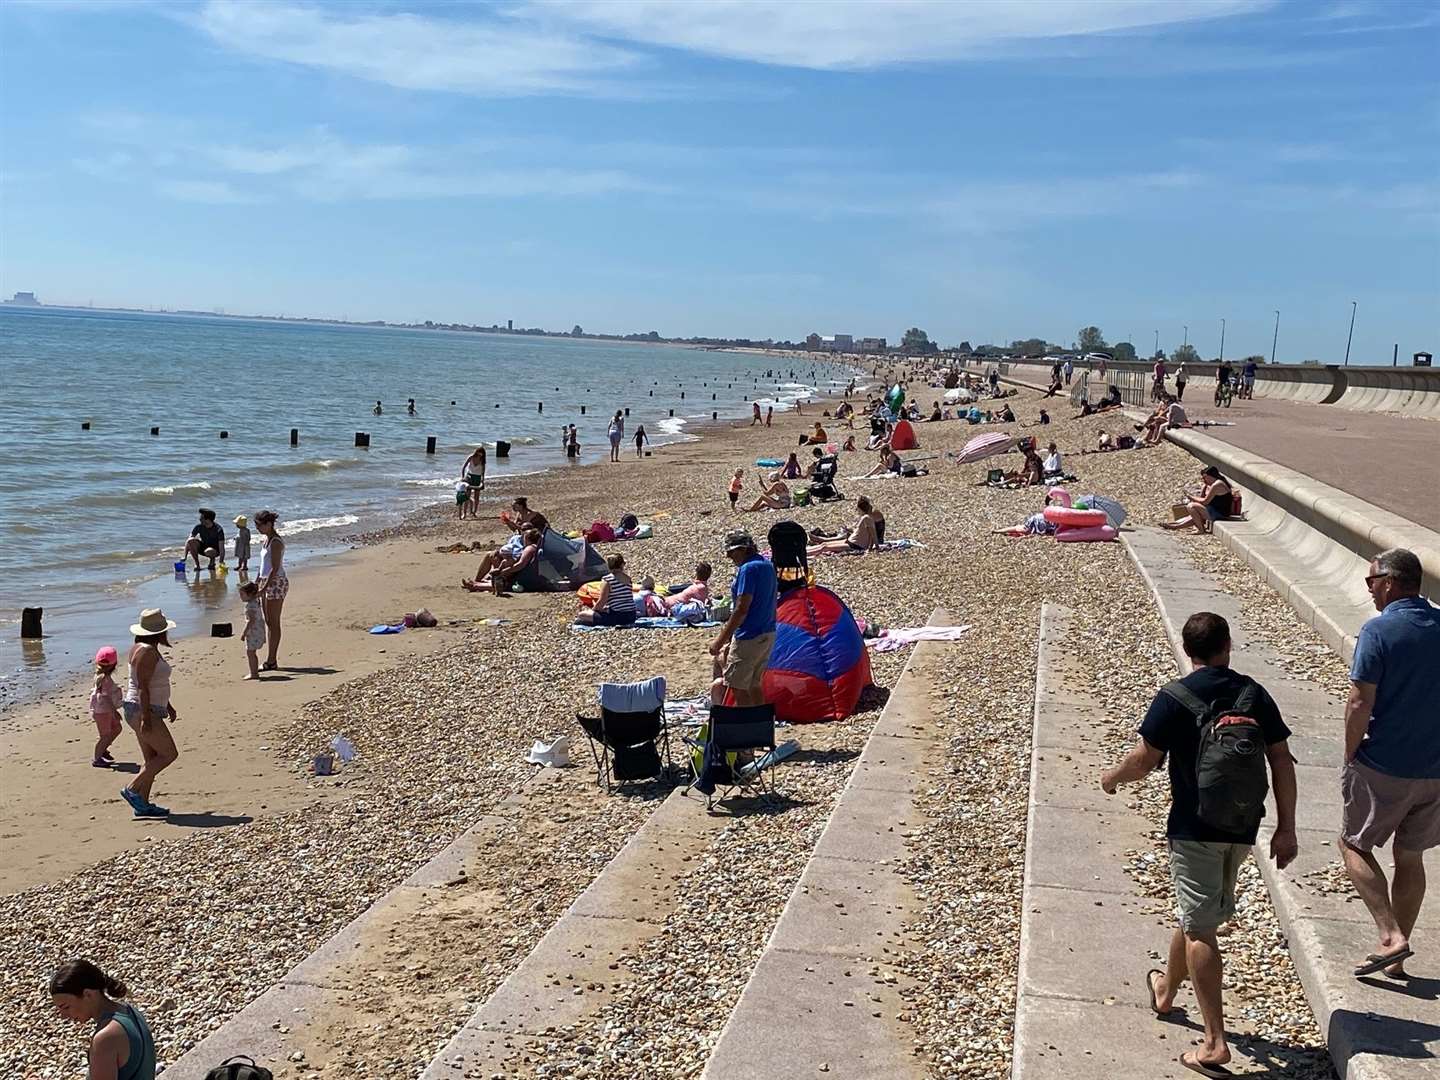 The beaches in Dymchurch are among some of the best-loved in Kent. Photo: Barry Goodwin